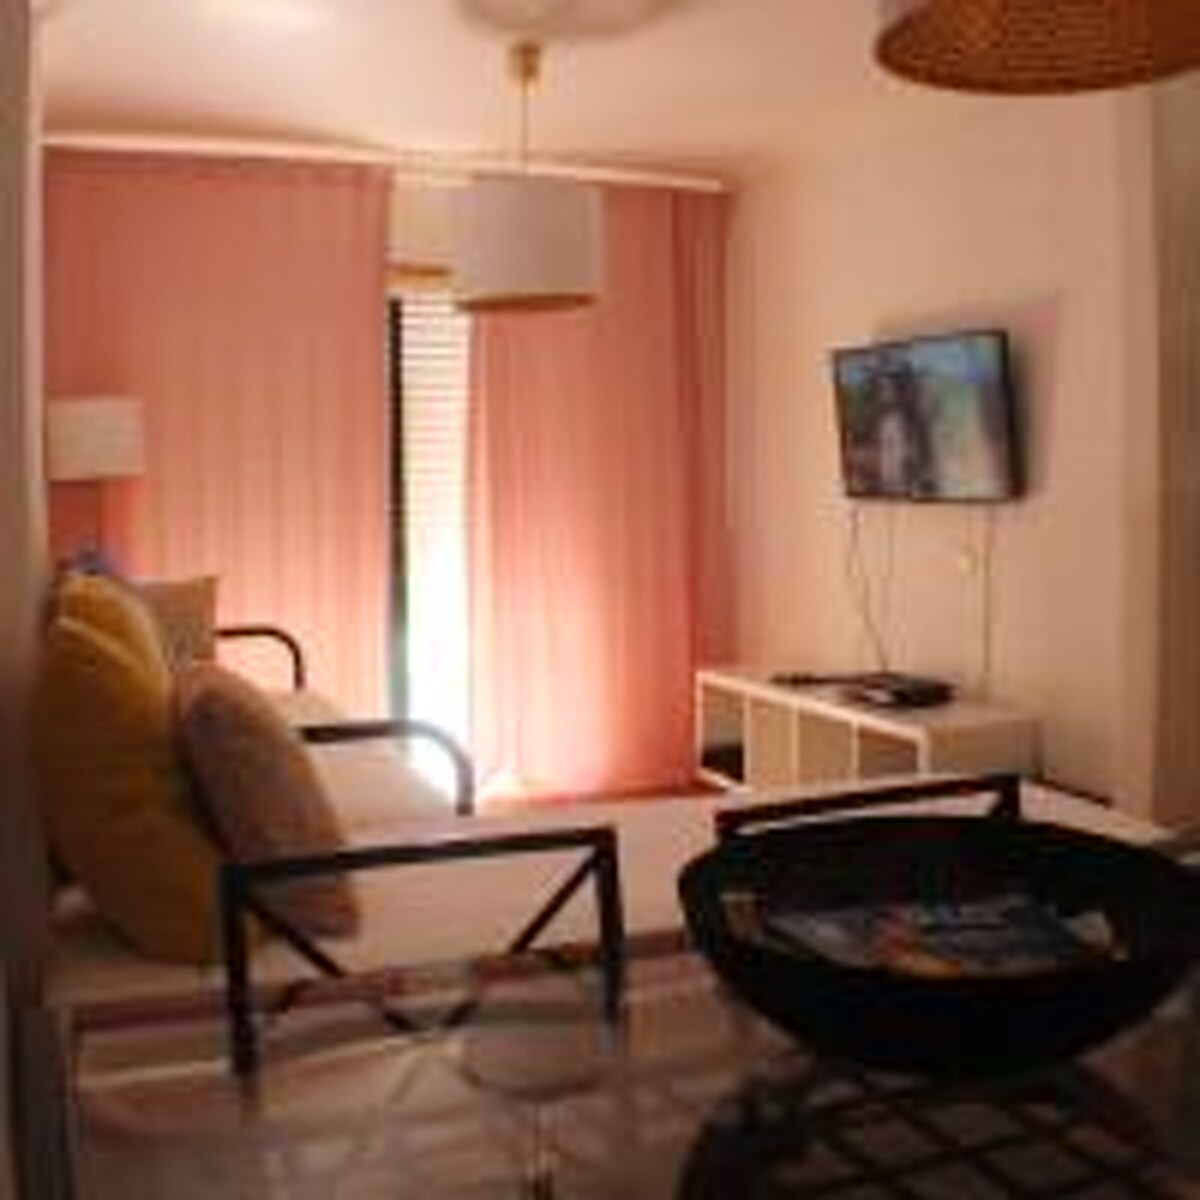 Apartement 2 km away from the beach with jacuzzi